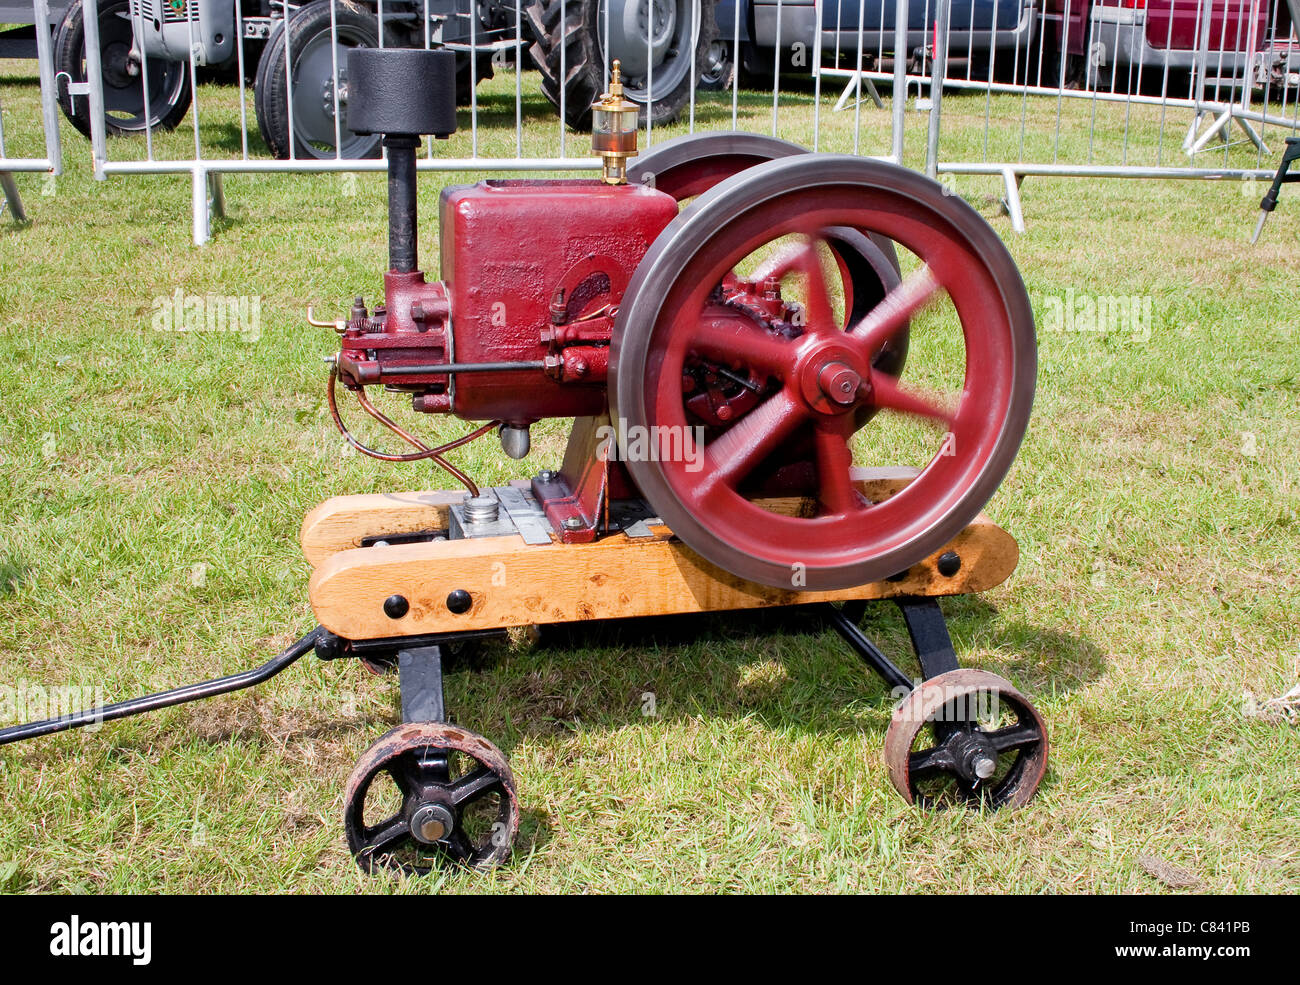 Vintage Restored Red Stationary Engine with Spinning Flywheel Stock Photo